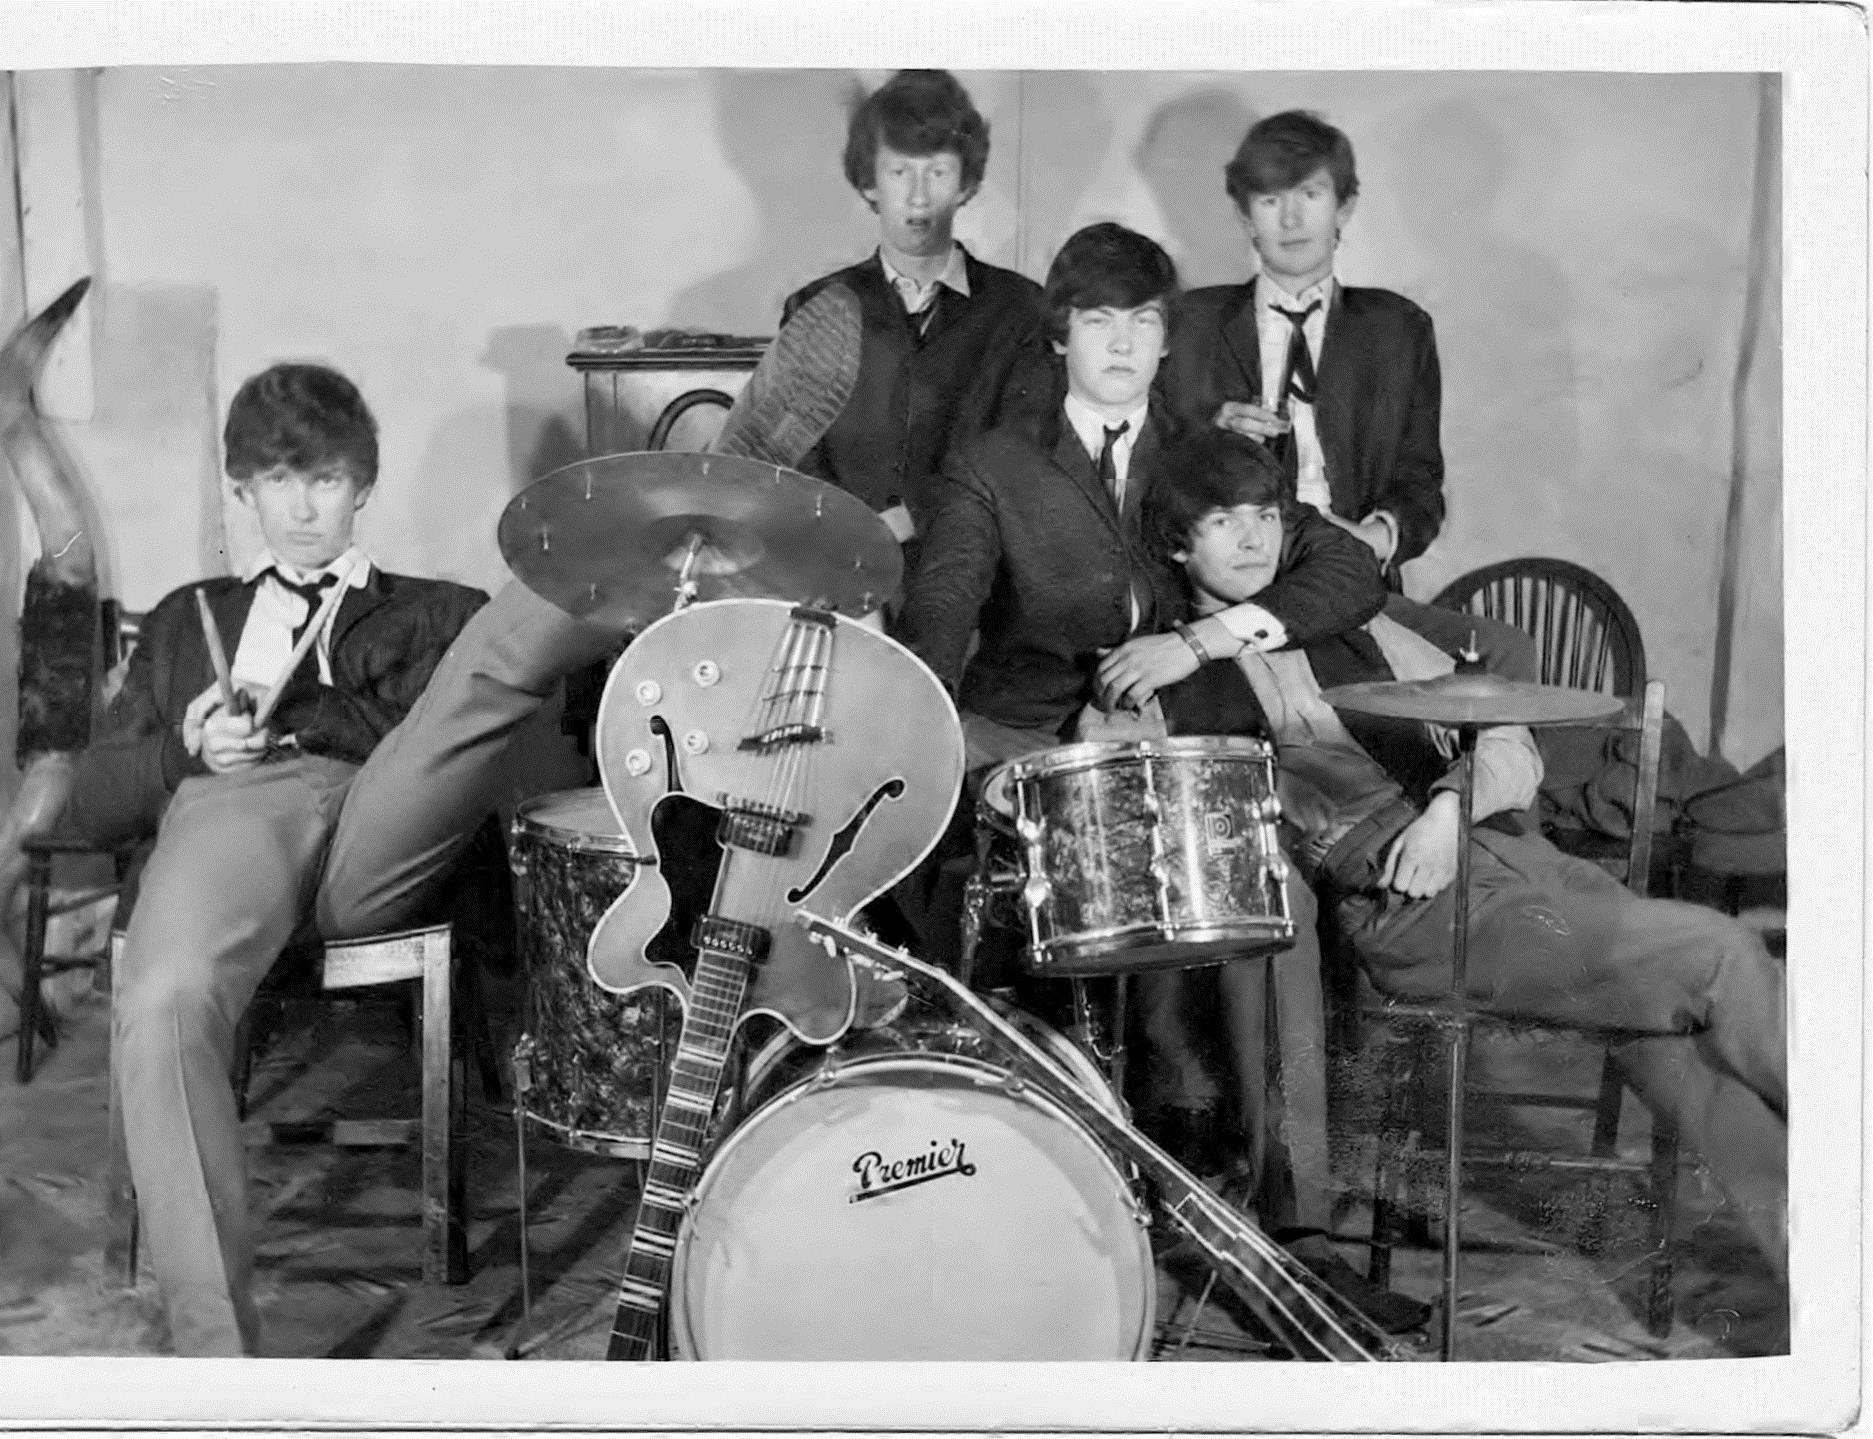 The Breakaways in the 60s. Left to right: Bob Ellis, bass; Roger Cramp, lead guitar; Clive Davies, drums; Chris Easdown, lead singer (sitting slumped against Clive); Doug Toulson, rhythm guitar (behind Chris)